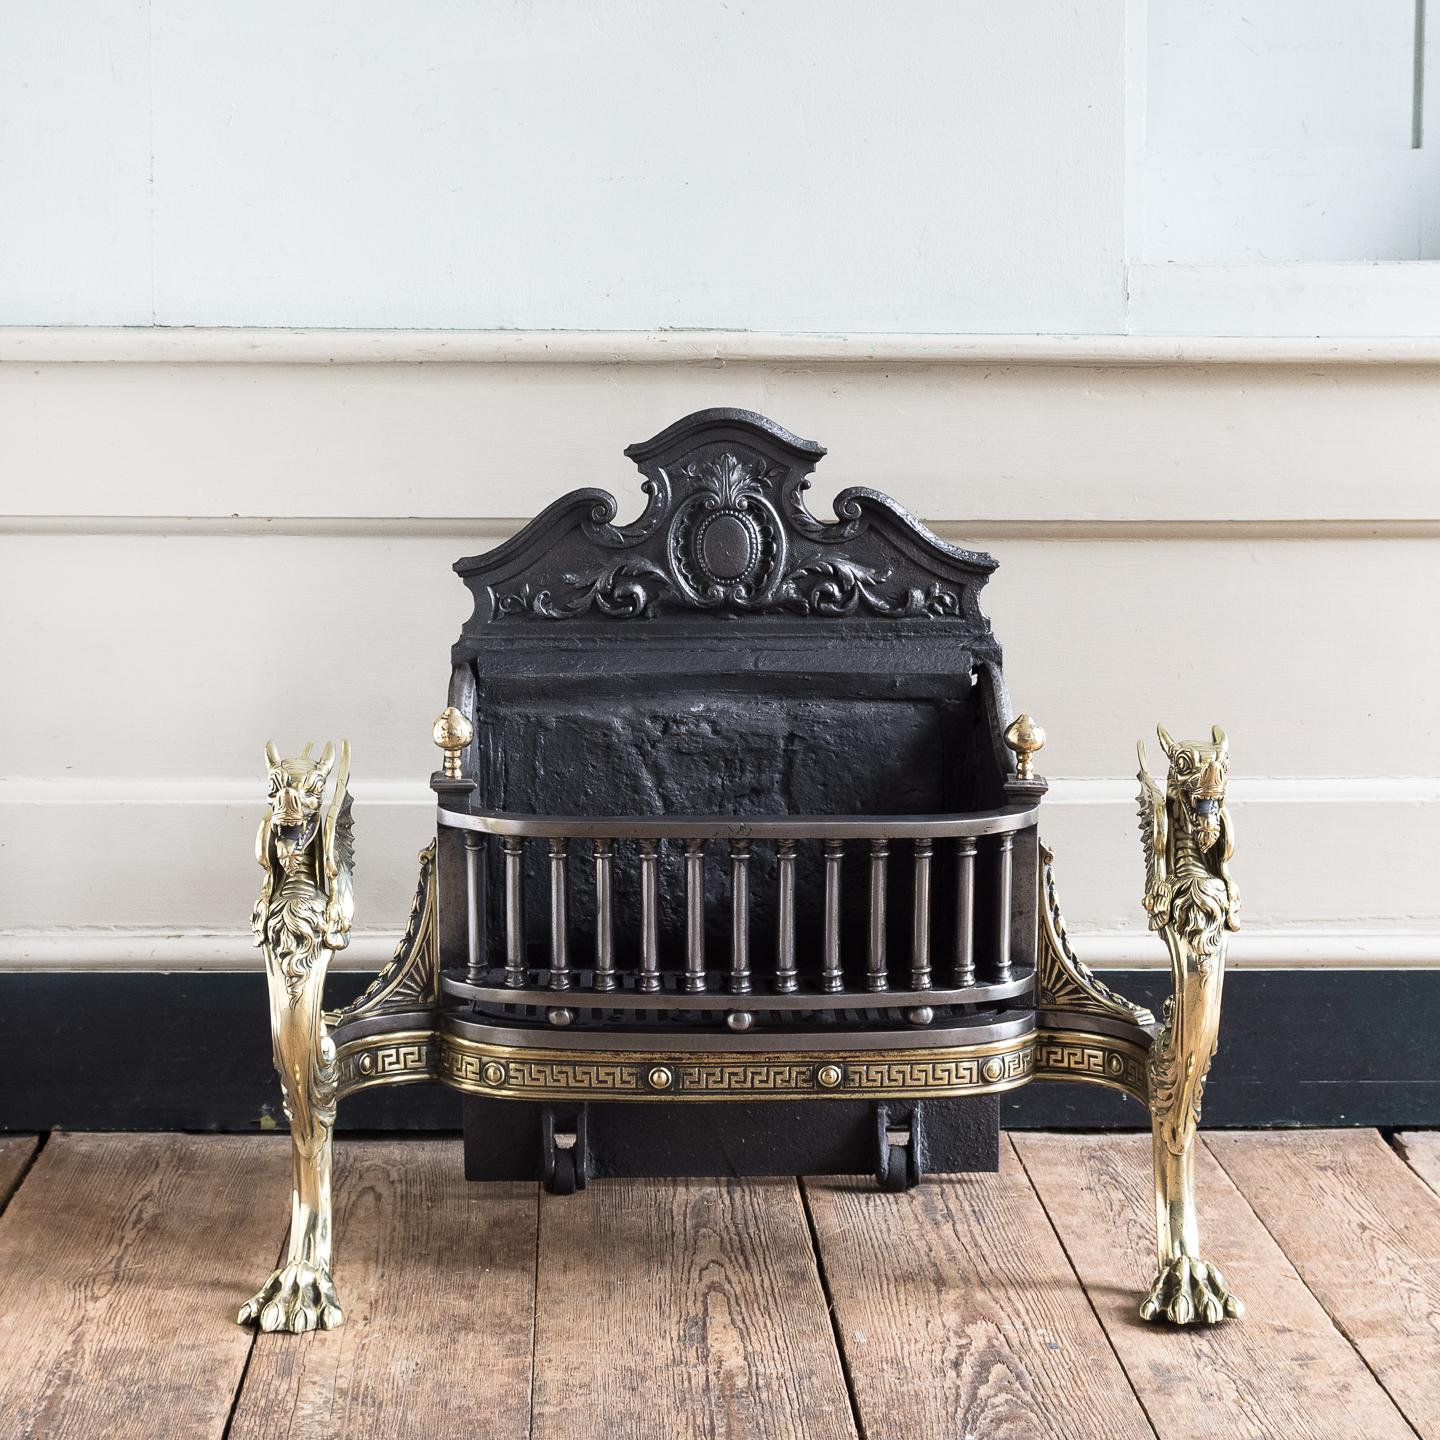 A Victorian iron and brass Griffin fire grate, the Rococo backplate centered by cabochon, the grate composed of a run of Doric columns with a Greek key apron band below, all supported on finely cast brass Griffin monopodia with hairy paw feet.